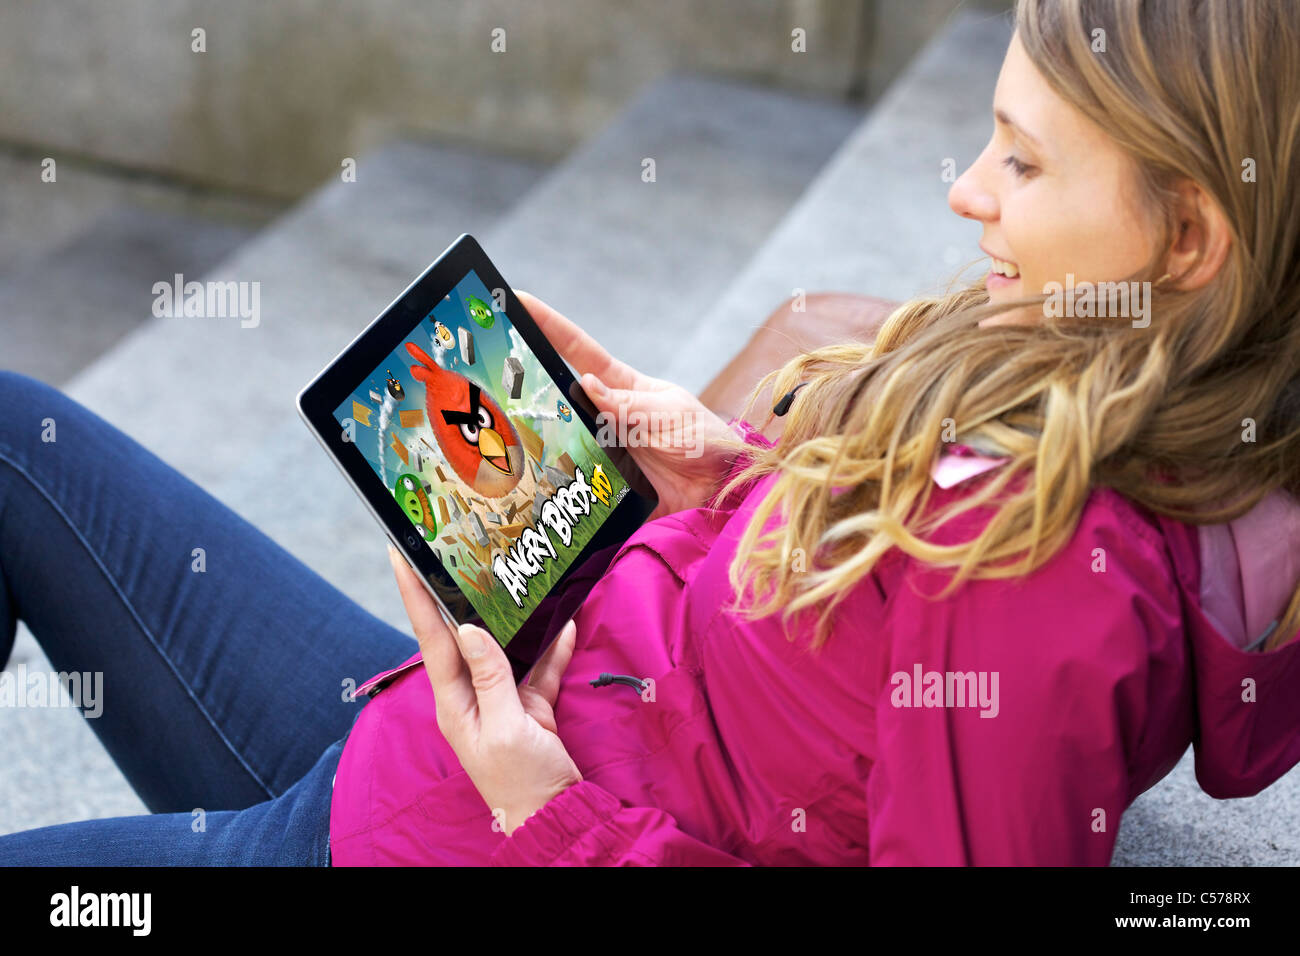 Close up view of woman's hand playing 'Angry Bird' game on an iPad 2 Stock Photo